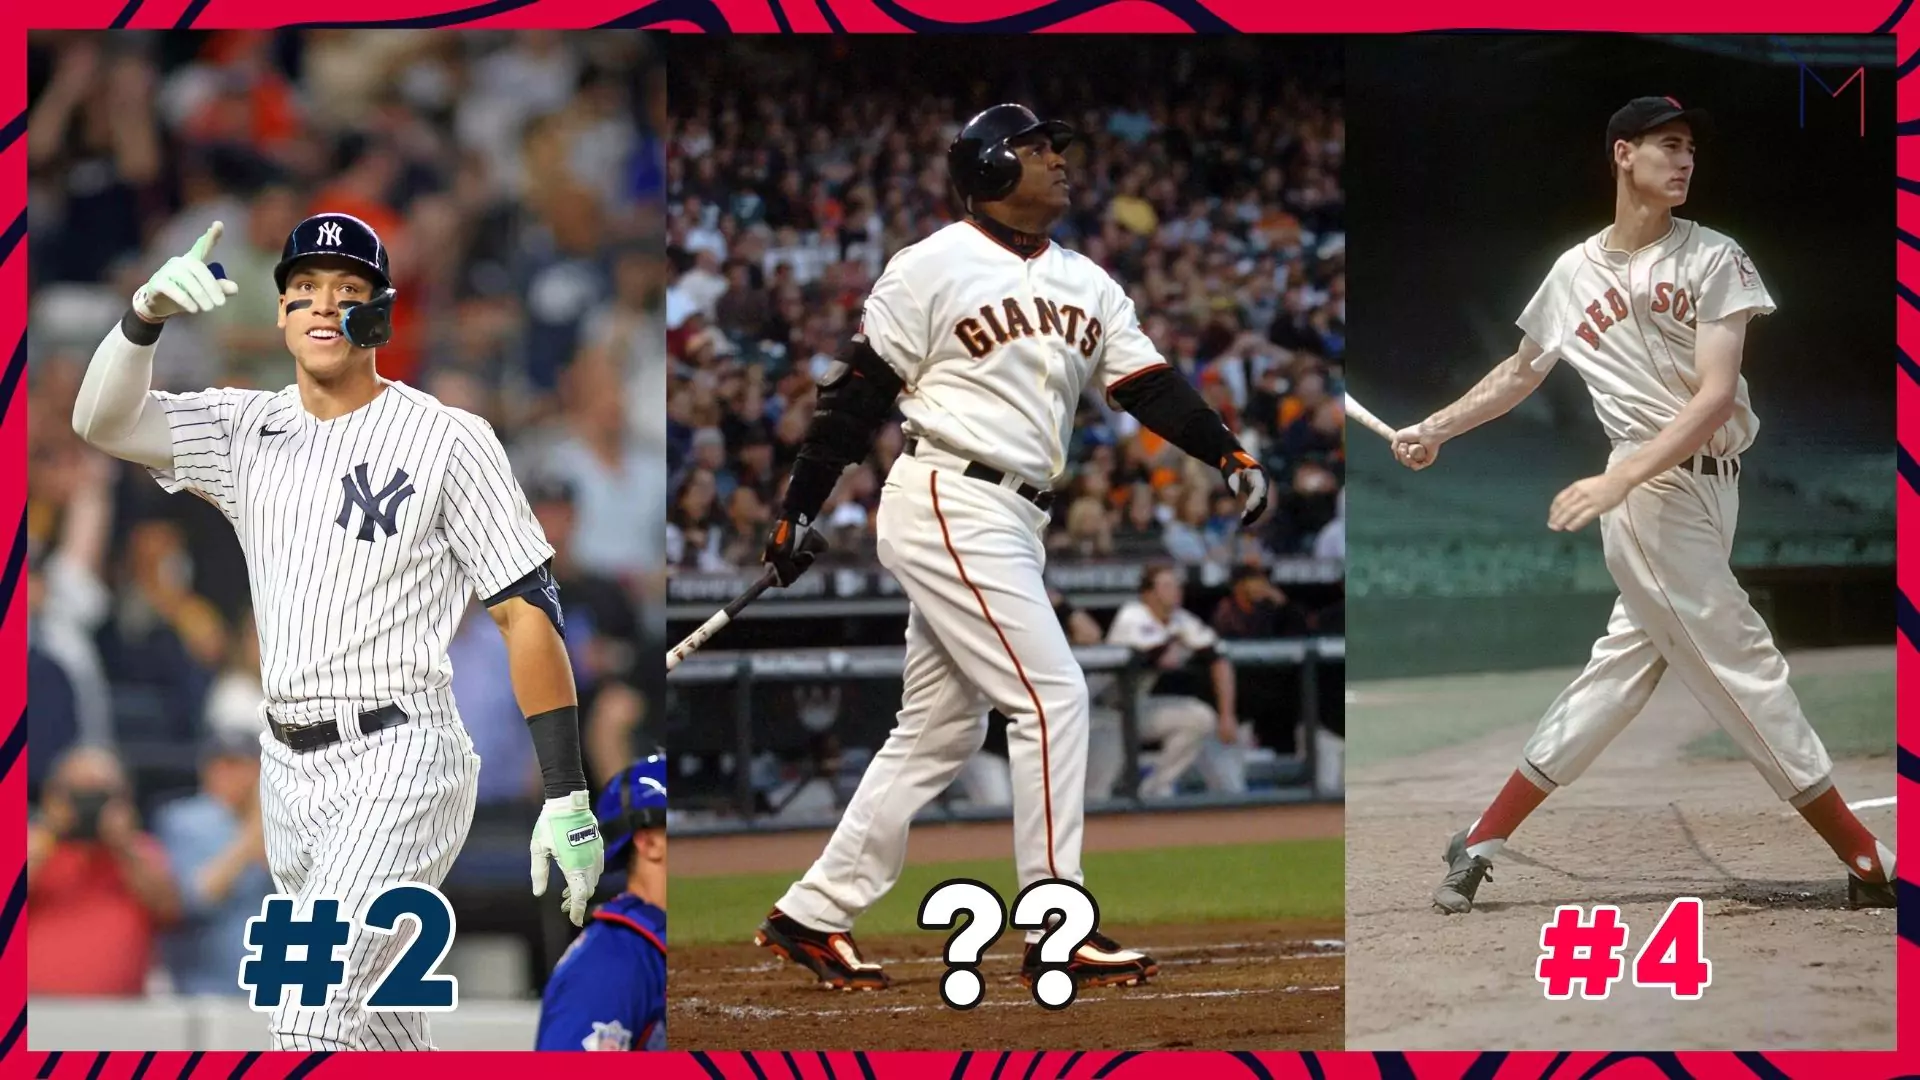 Top 10 most popular baseball players from California - Famous MLB players from California